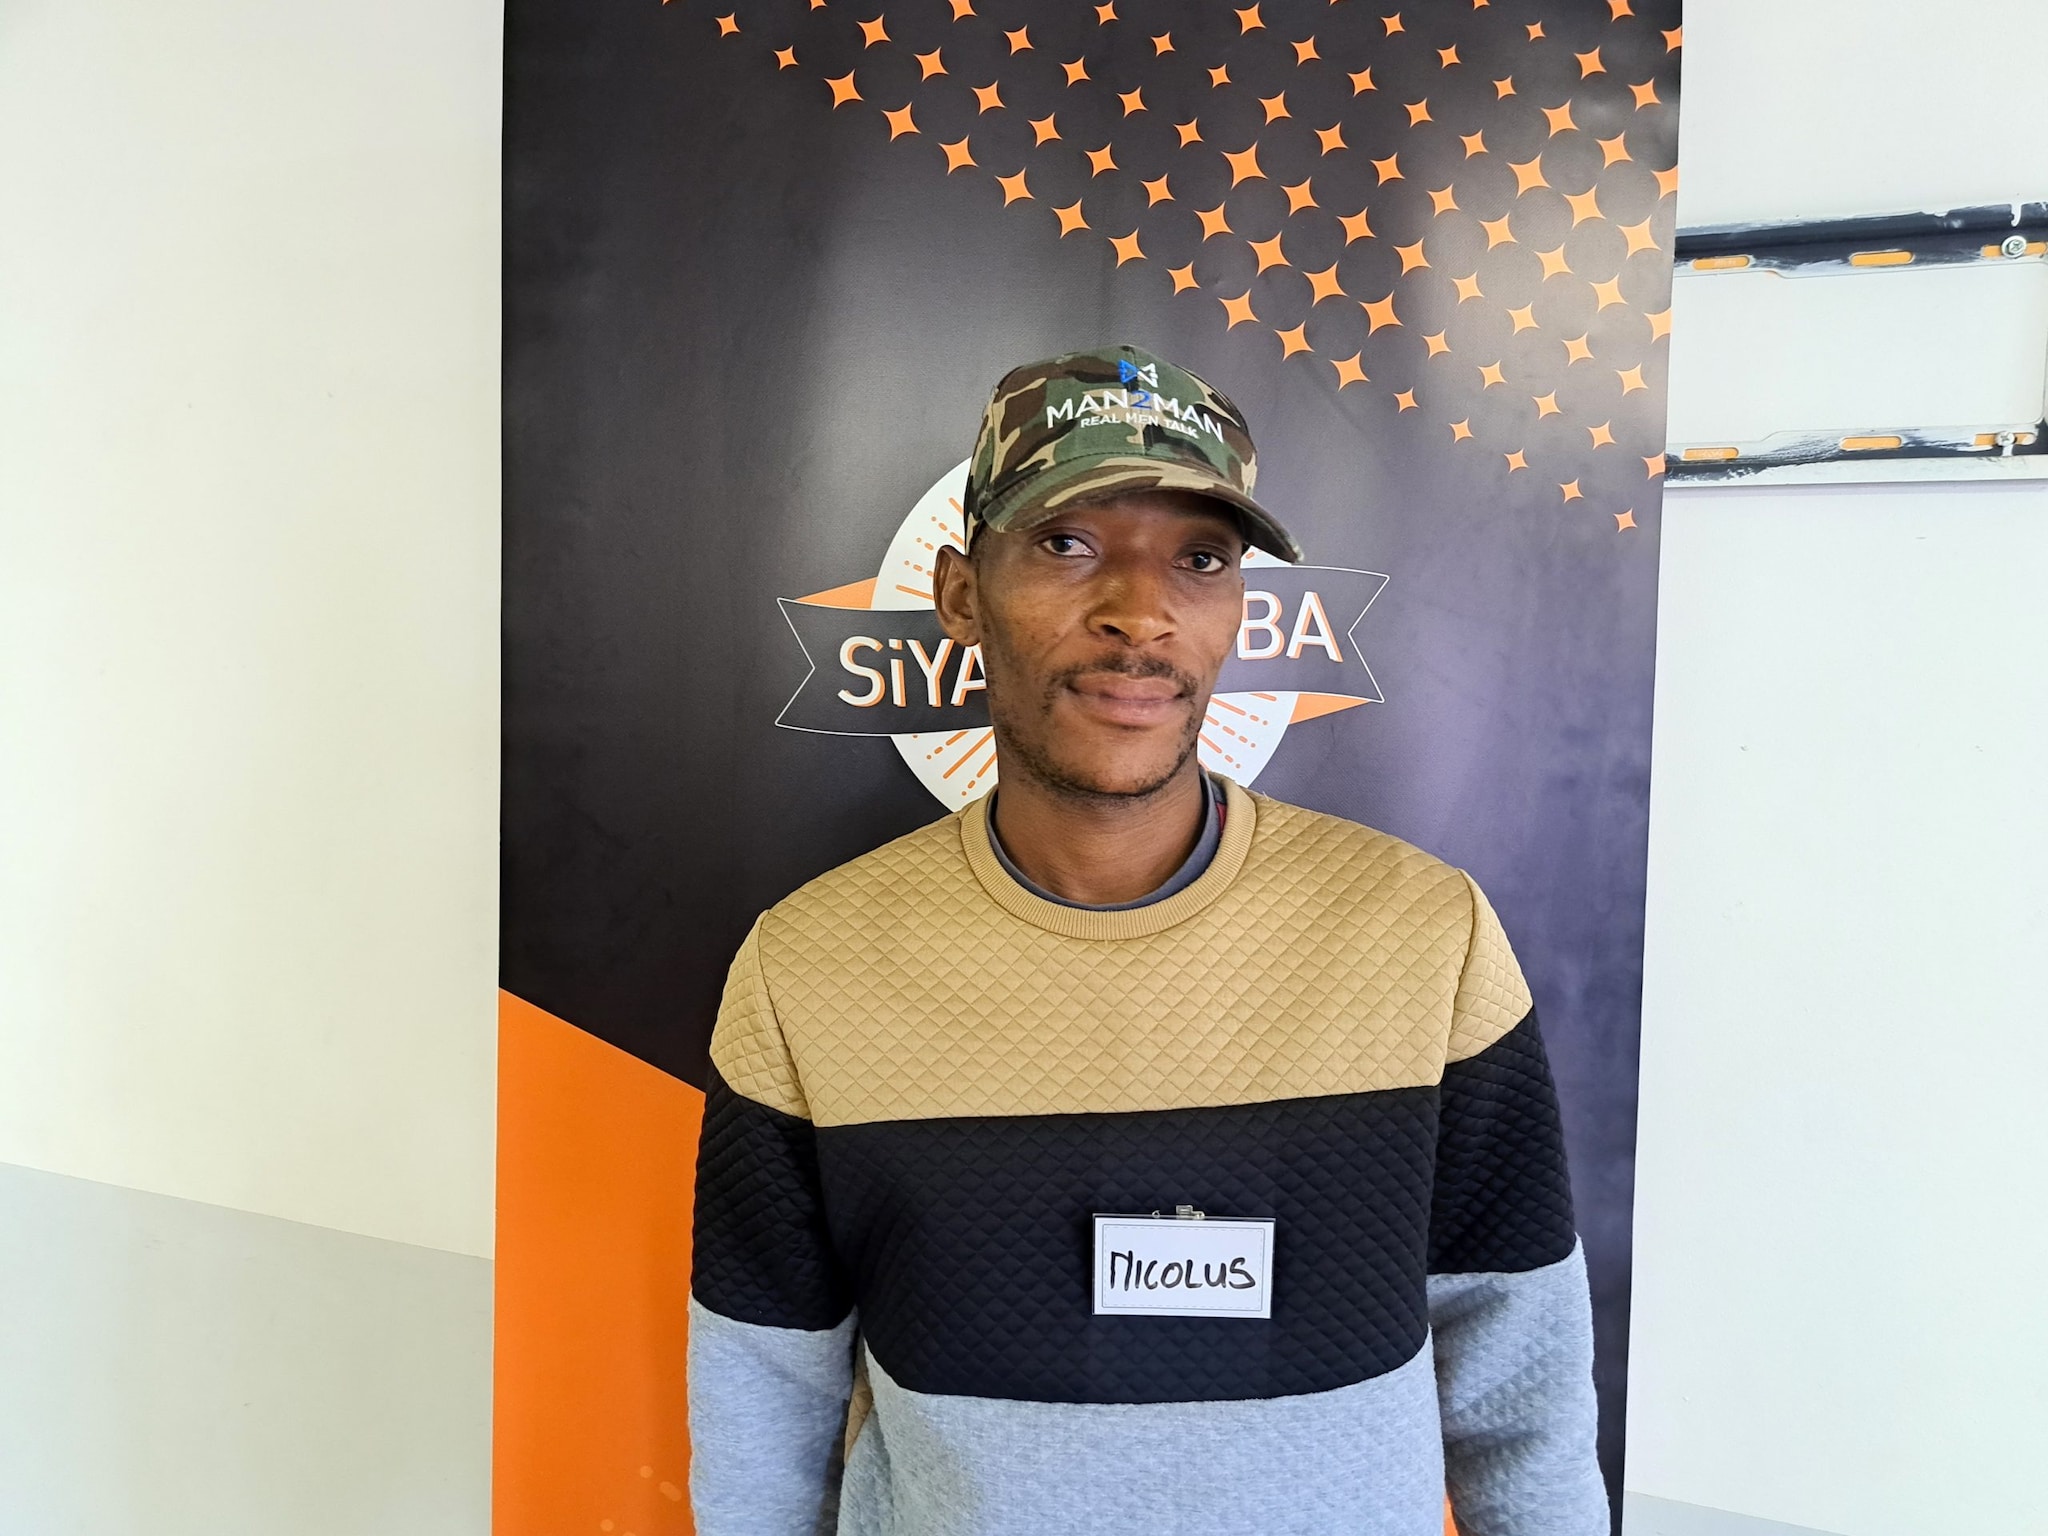 Nicolus-CDC supported Workshop Transforms the Lives of Men in South Africa